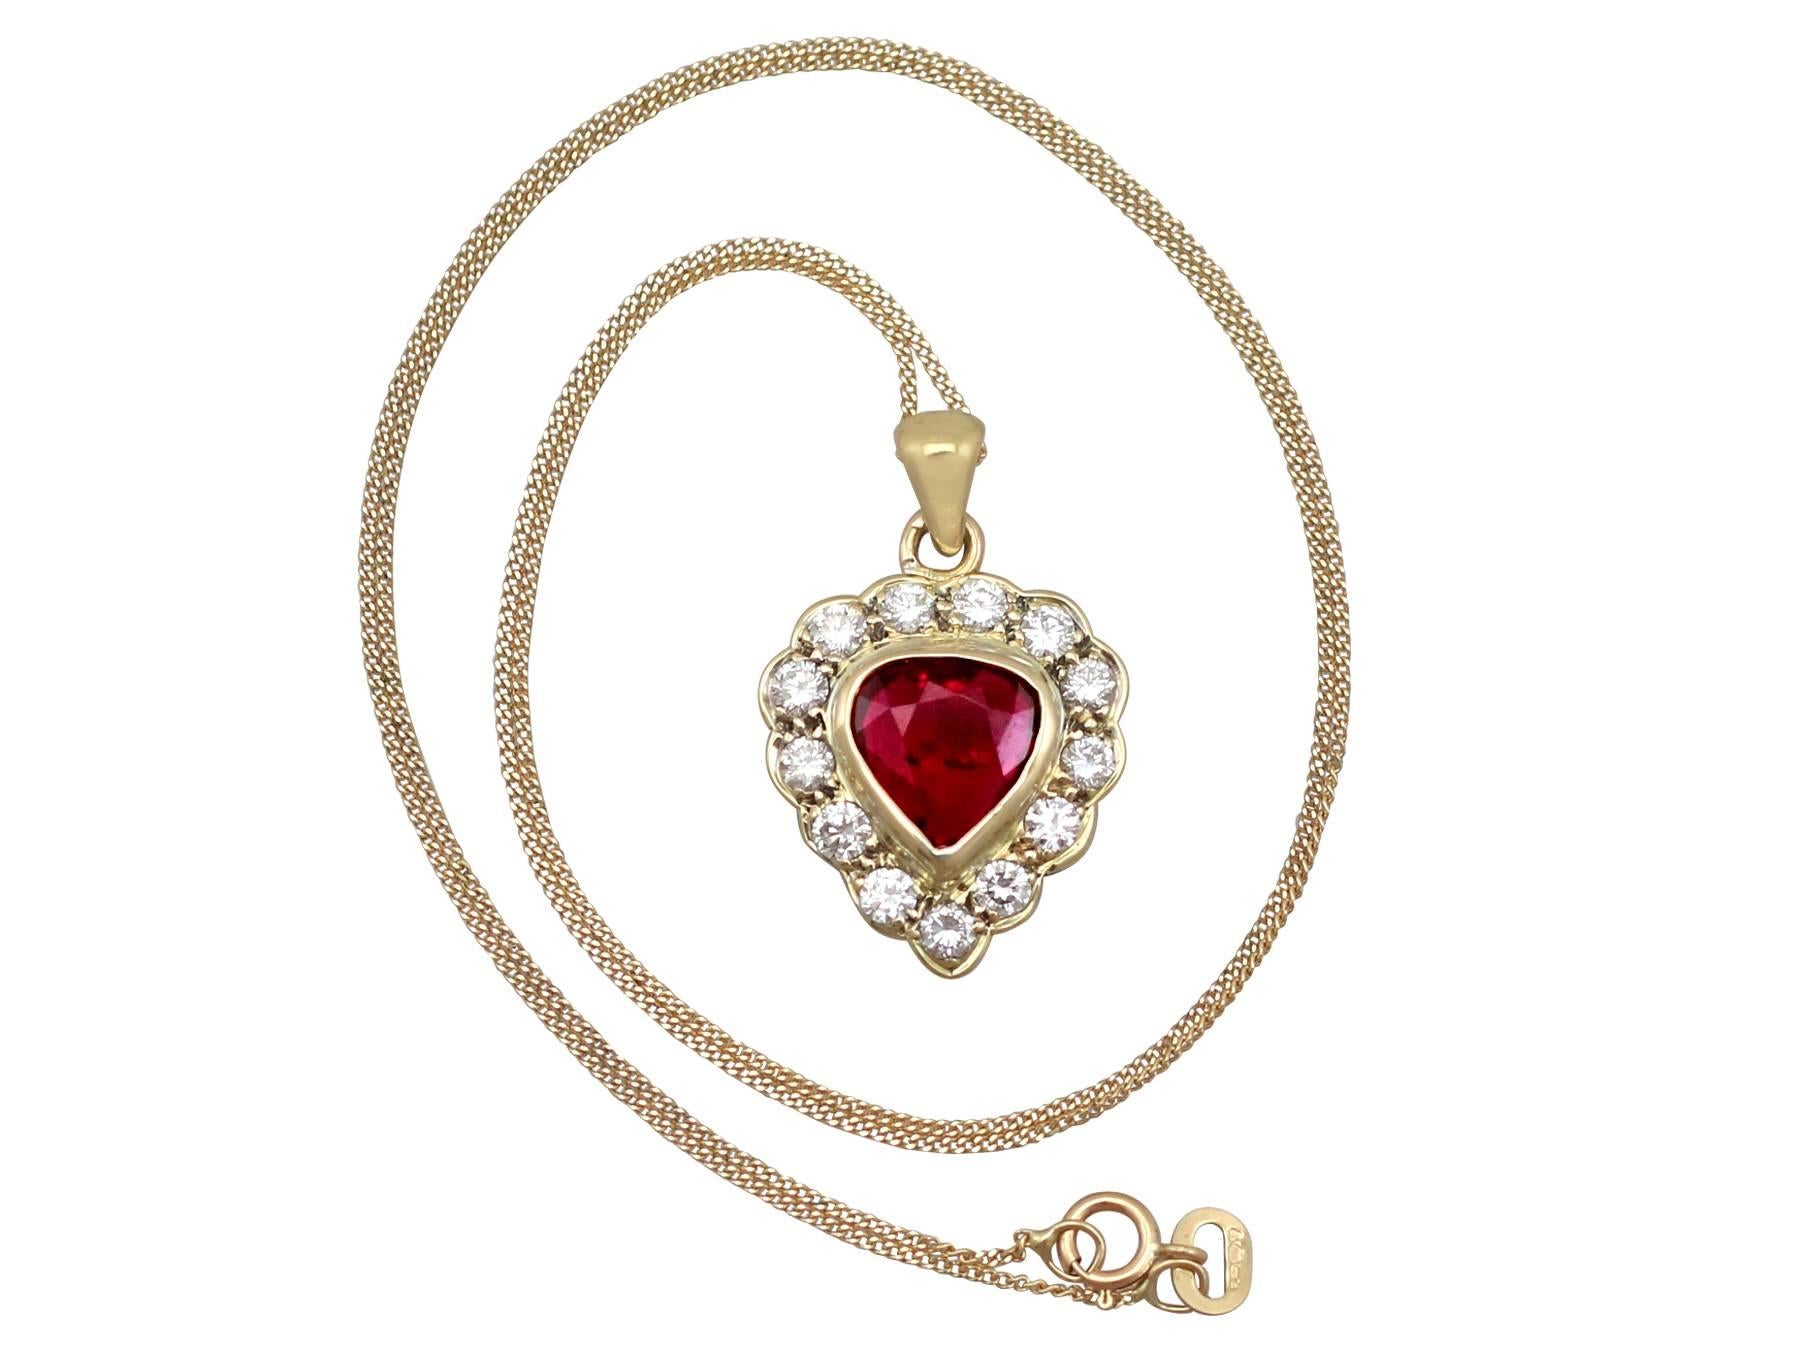 An impressive 1.55 carat ruby and 0.69 carat diamond, 18 karat yellow gold heart shaped pendant and chain; part of our diverse vintage jewellery collections.

This fine and impressive ruby and diamond heart pendant has been crafted in 18k yellow